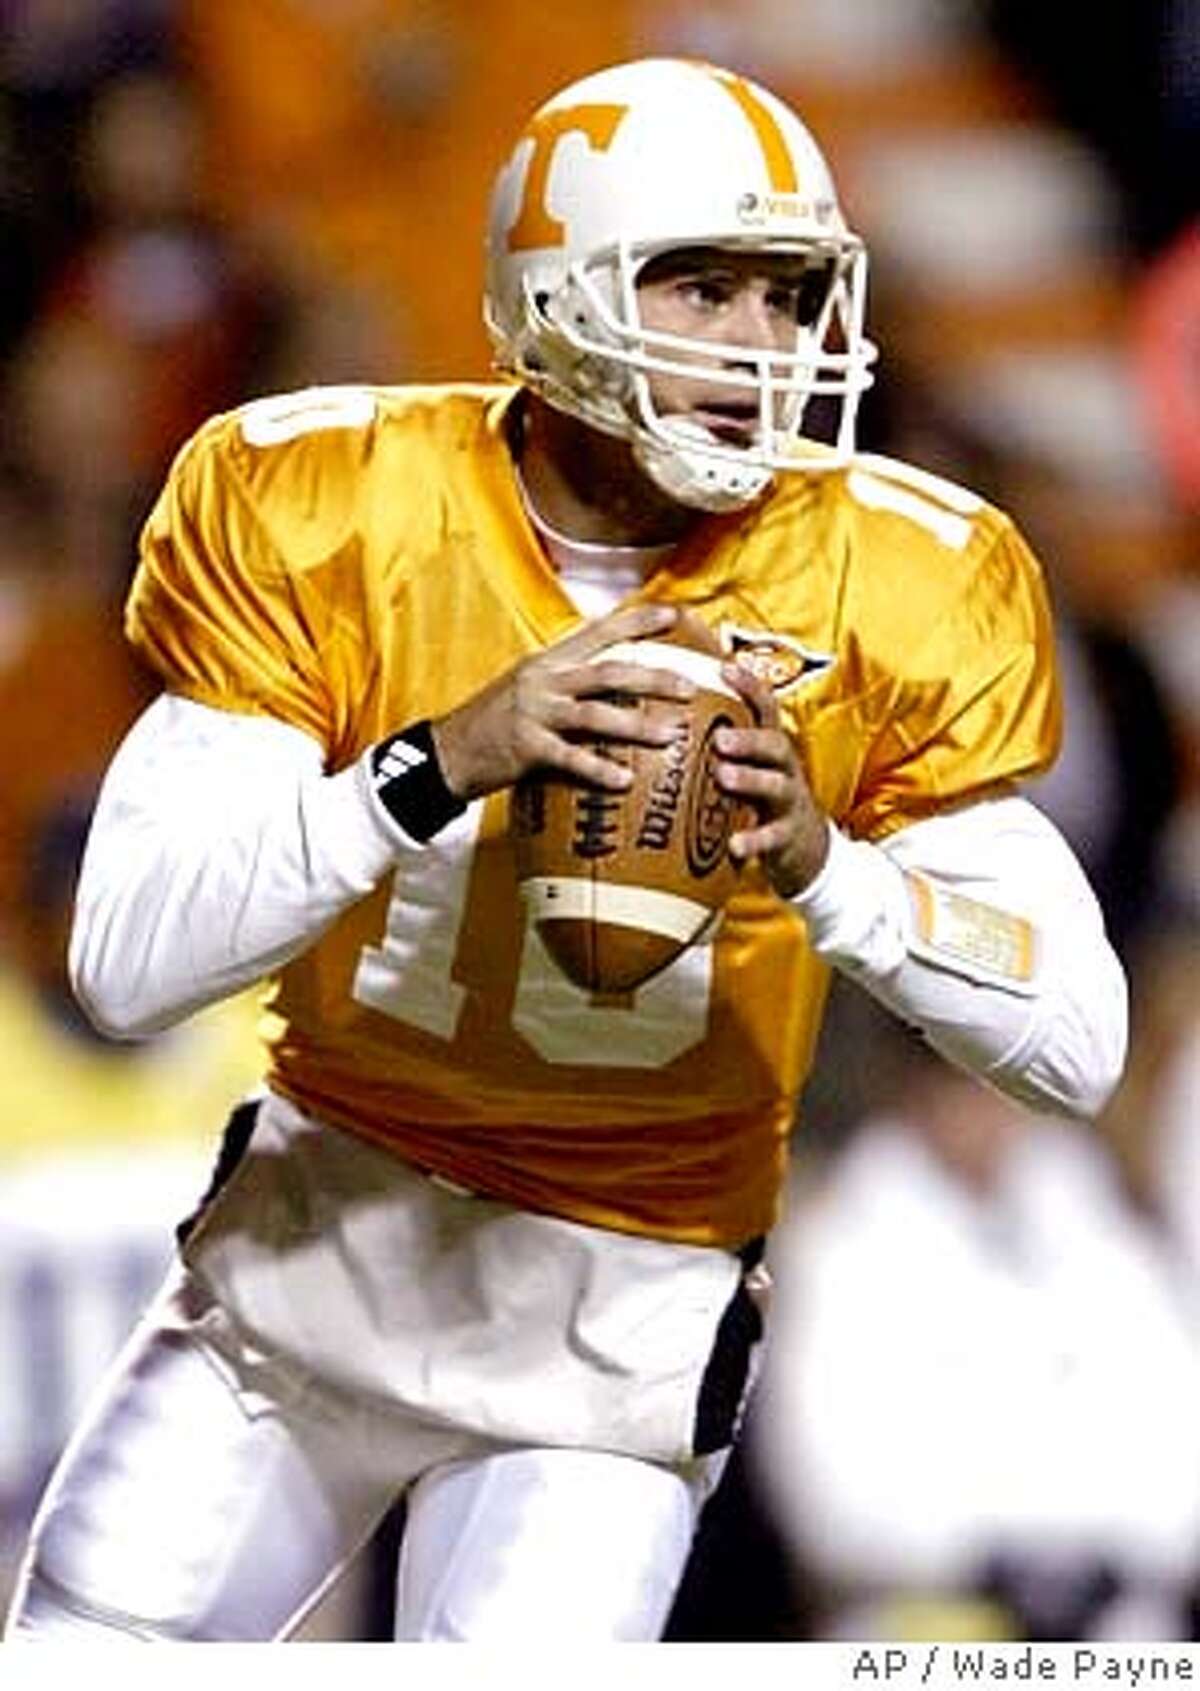 ** FILE ** Tennessee quarterback Erik Ainge (10) rolls out to pass during their game against South Carolina in this Oct. 29, 2005 file photo, in Knoxville, Tenn. Ainge has a broken pinkie on his throwing hand, but is expected to play Saturday at No. 12 California. (AP Photo/Wade Payne) A OCT. 29, 2005 FILE PHOTO